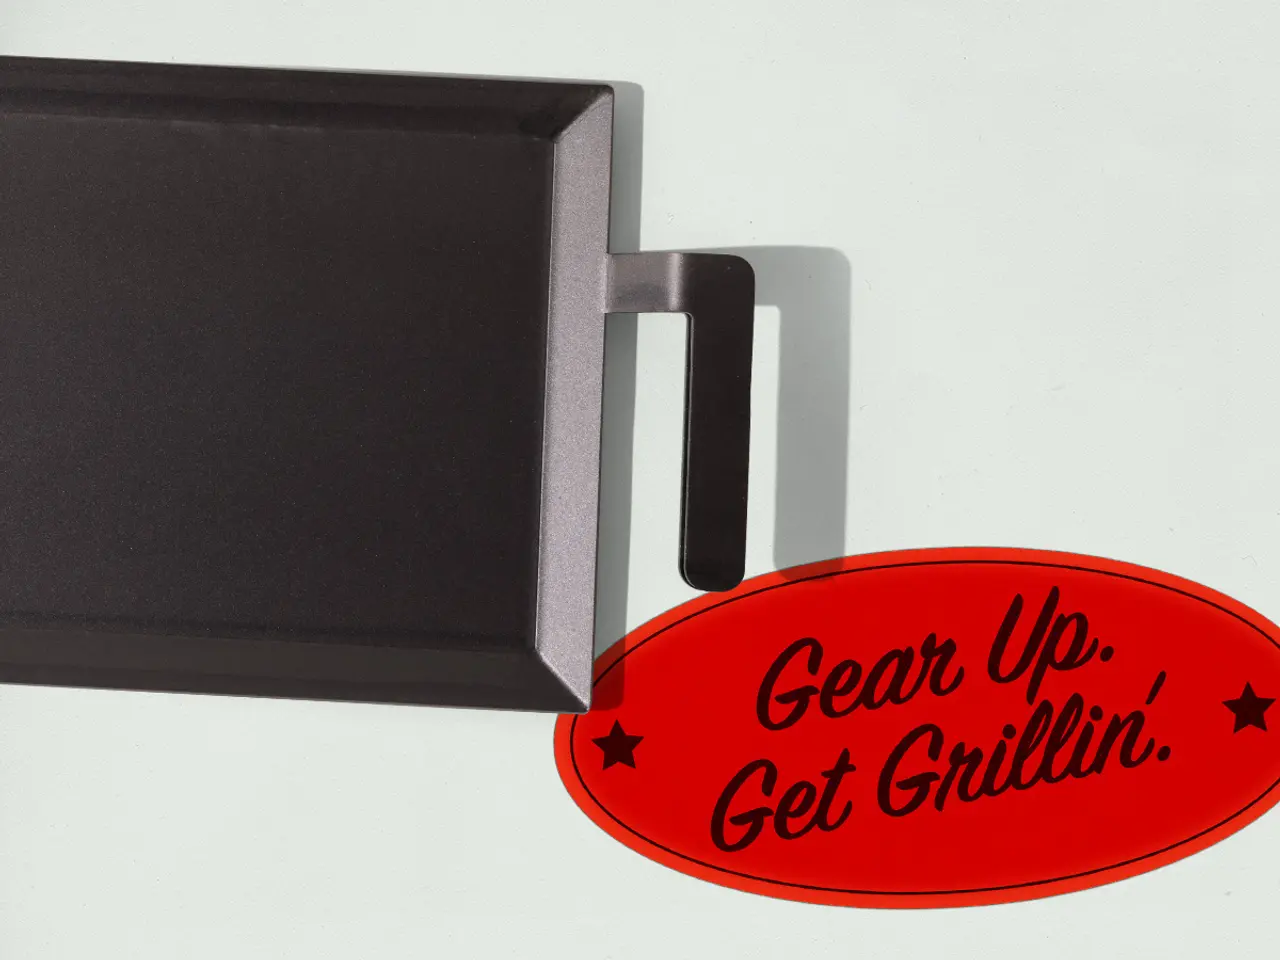 A close-up view of a black gadget with a silver handle attached to a red oval sign that reads "Gear Up. Get Grillin'."